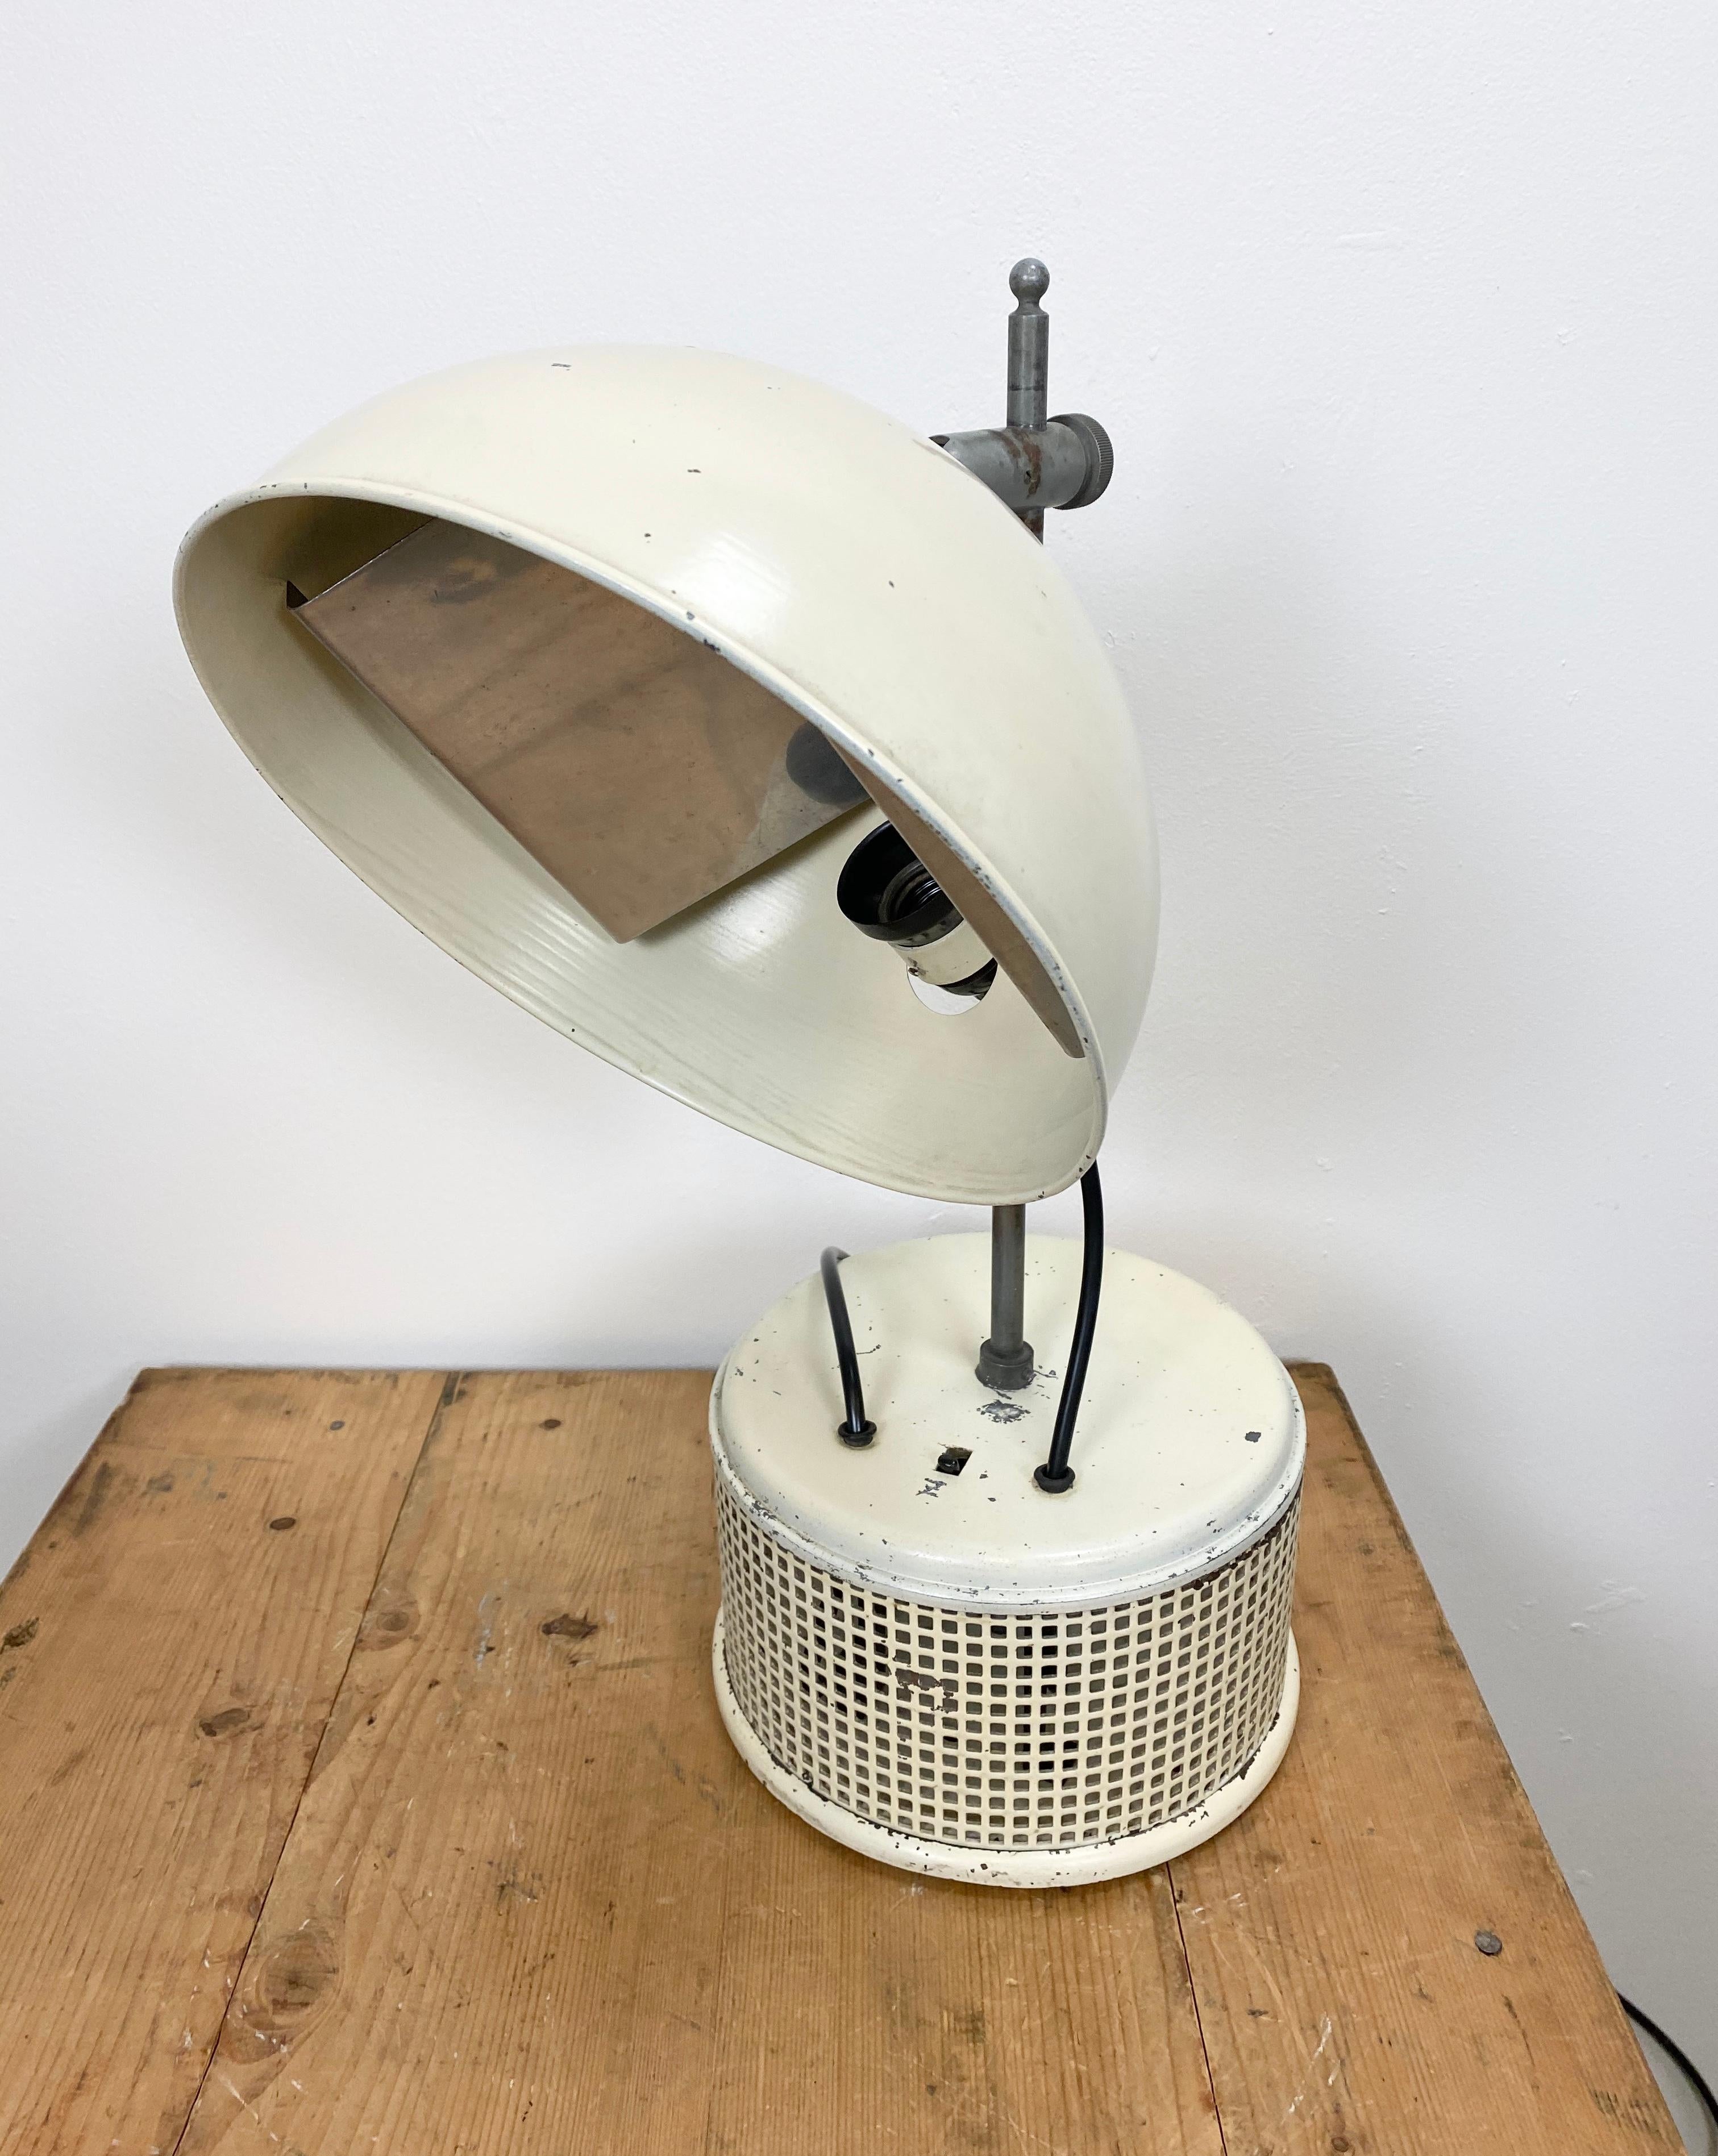 This beige industrial iron table lamp was made in former Czechoslovakia during the 1950s. It has an adjustable shade, a metal base with a switch, an original bakelite socket for E 27 light bulbs and new wire. The diameter of the lampshade is 27 cm.